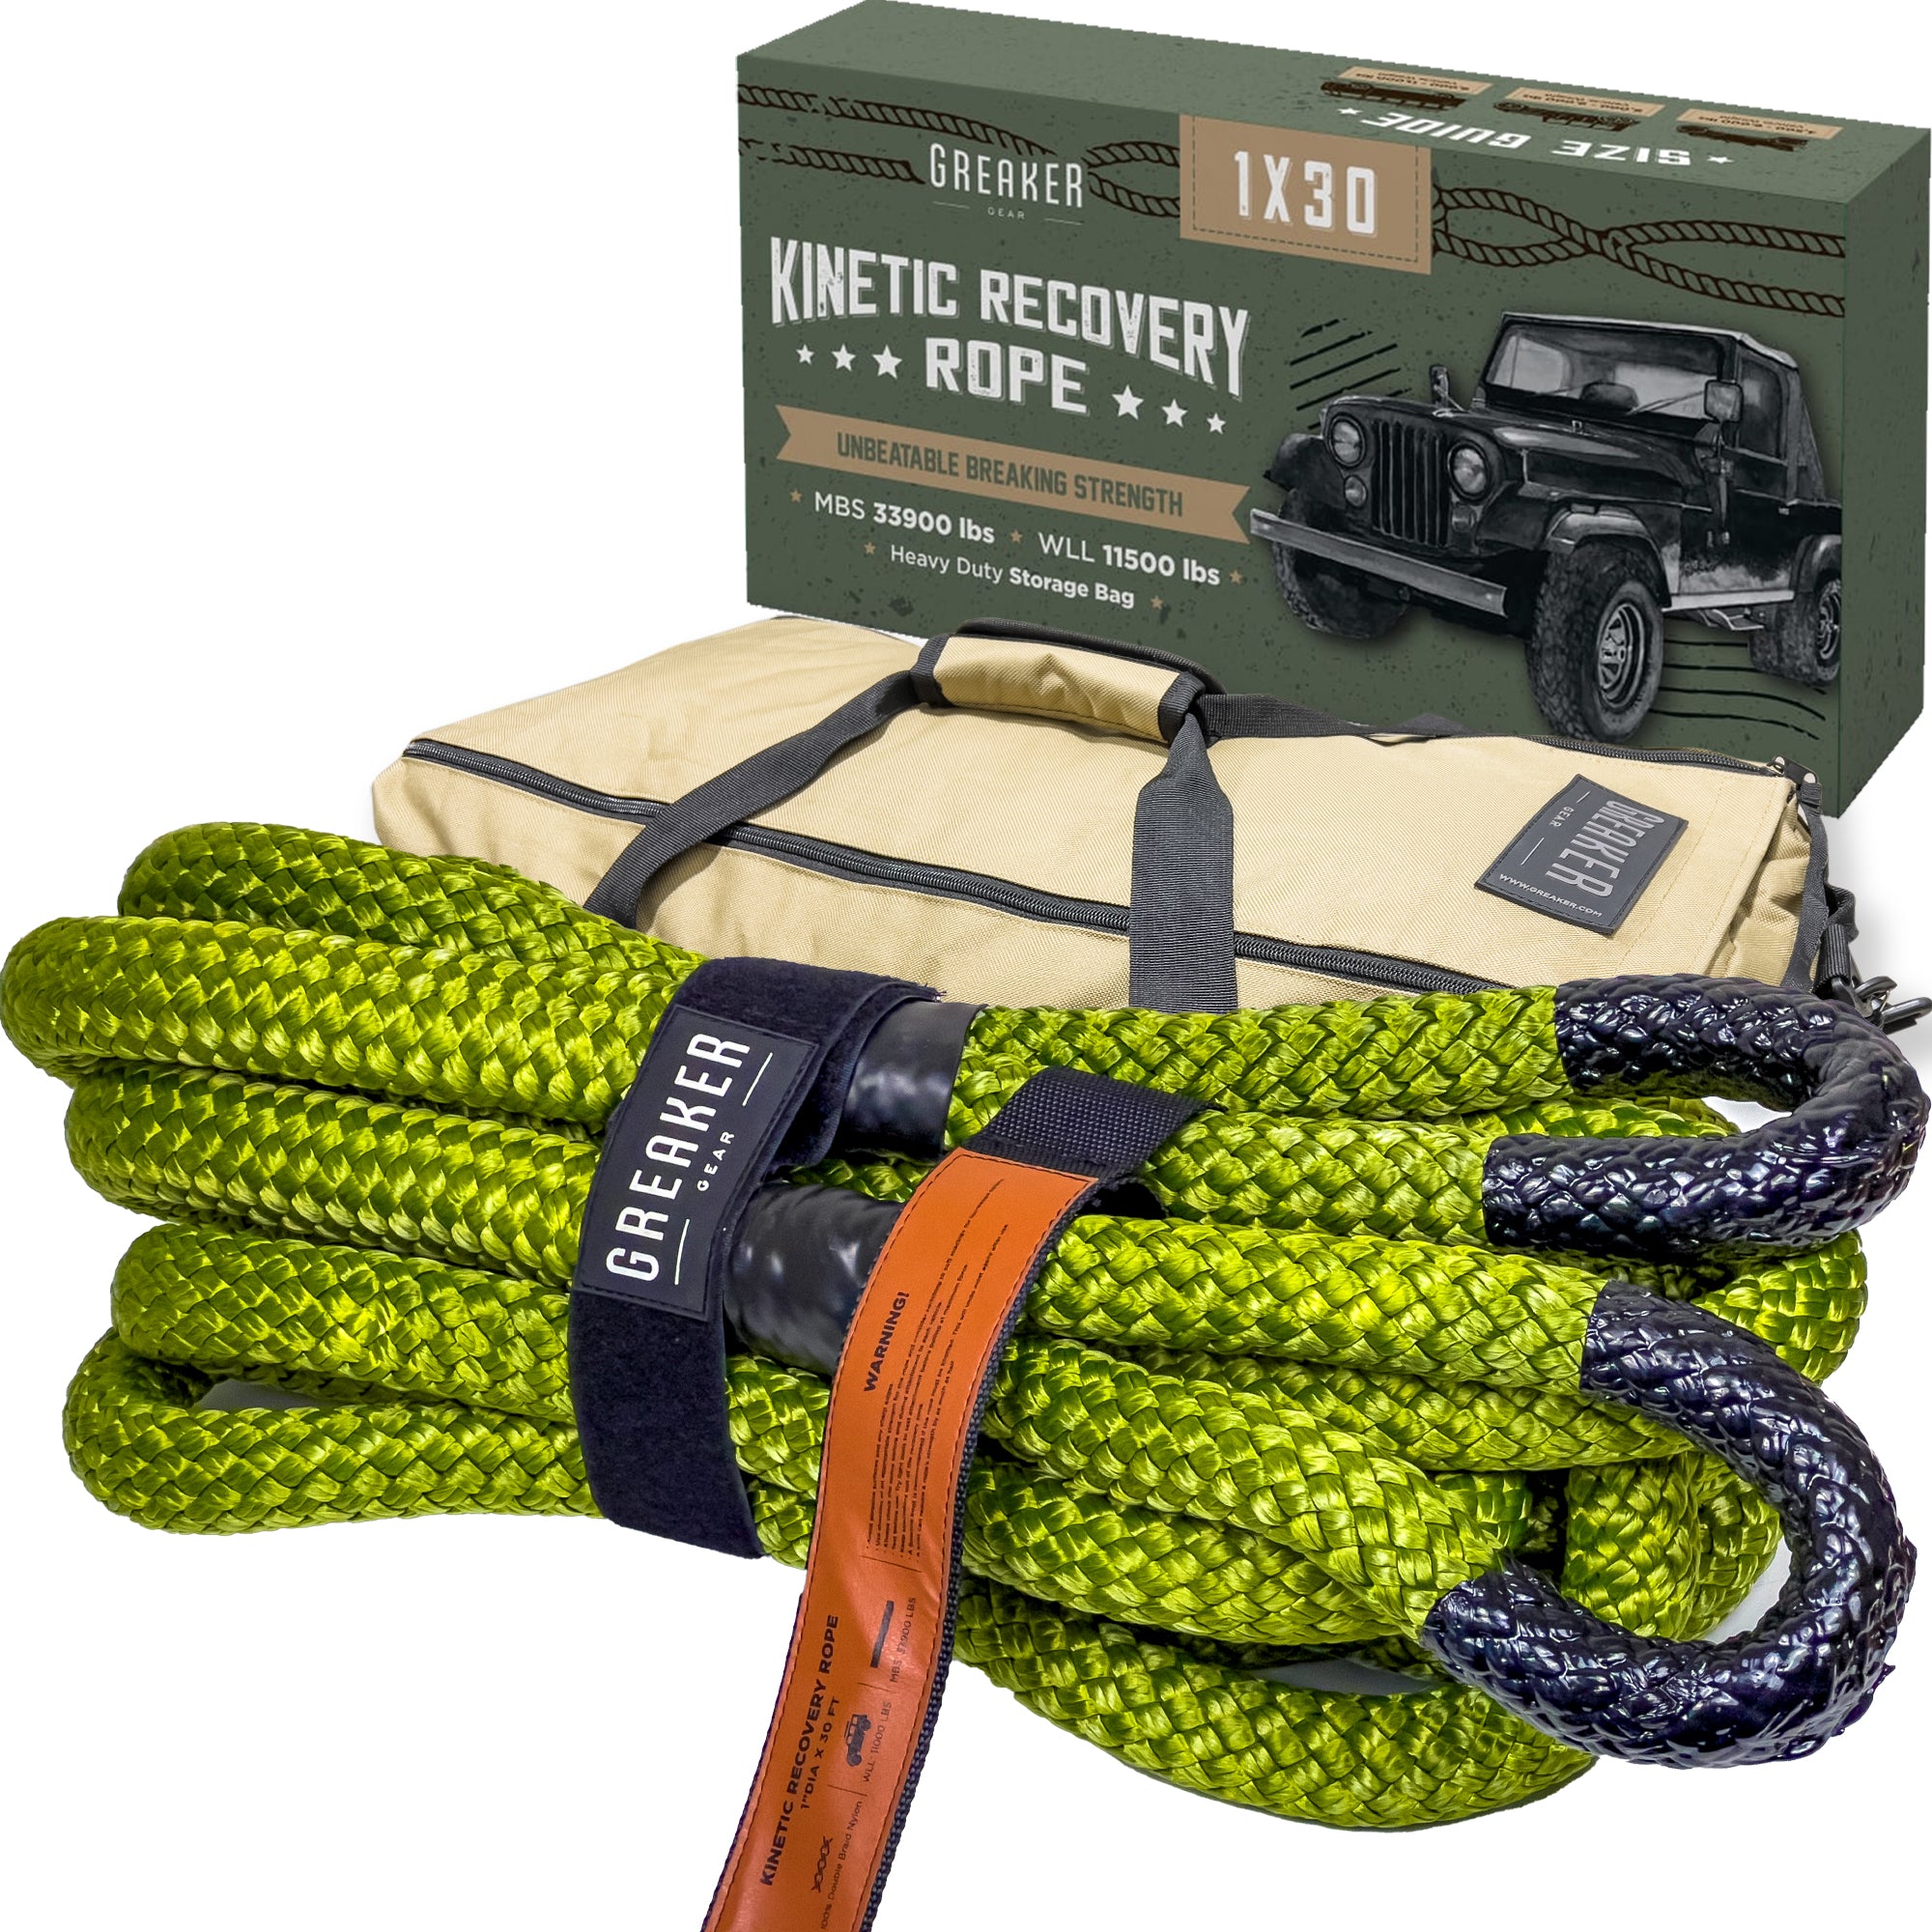 Limited Edition Greaker Kinetic Recovery Tow Rope Heavy Duty Offroad -  Unique 4x4 Style (Marble Green, 1 x30')